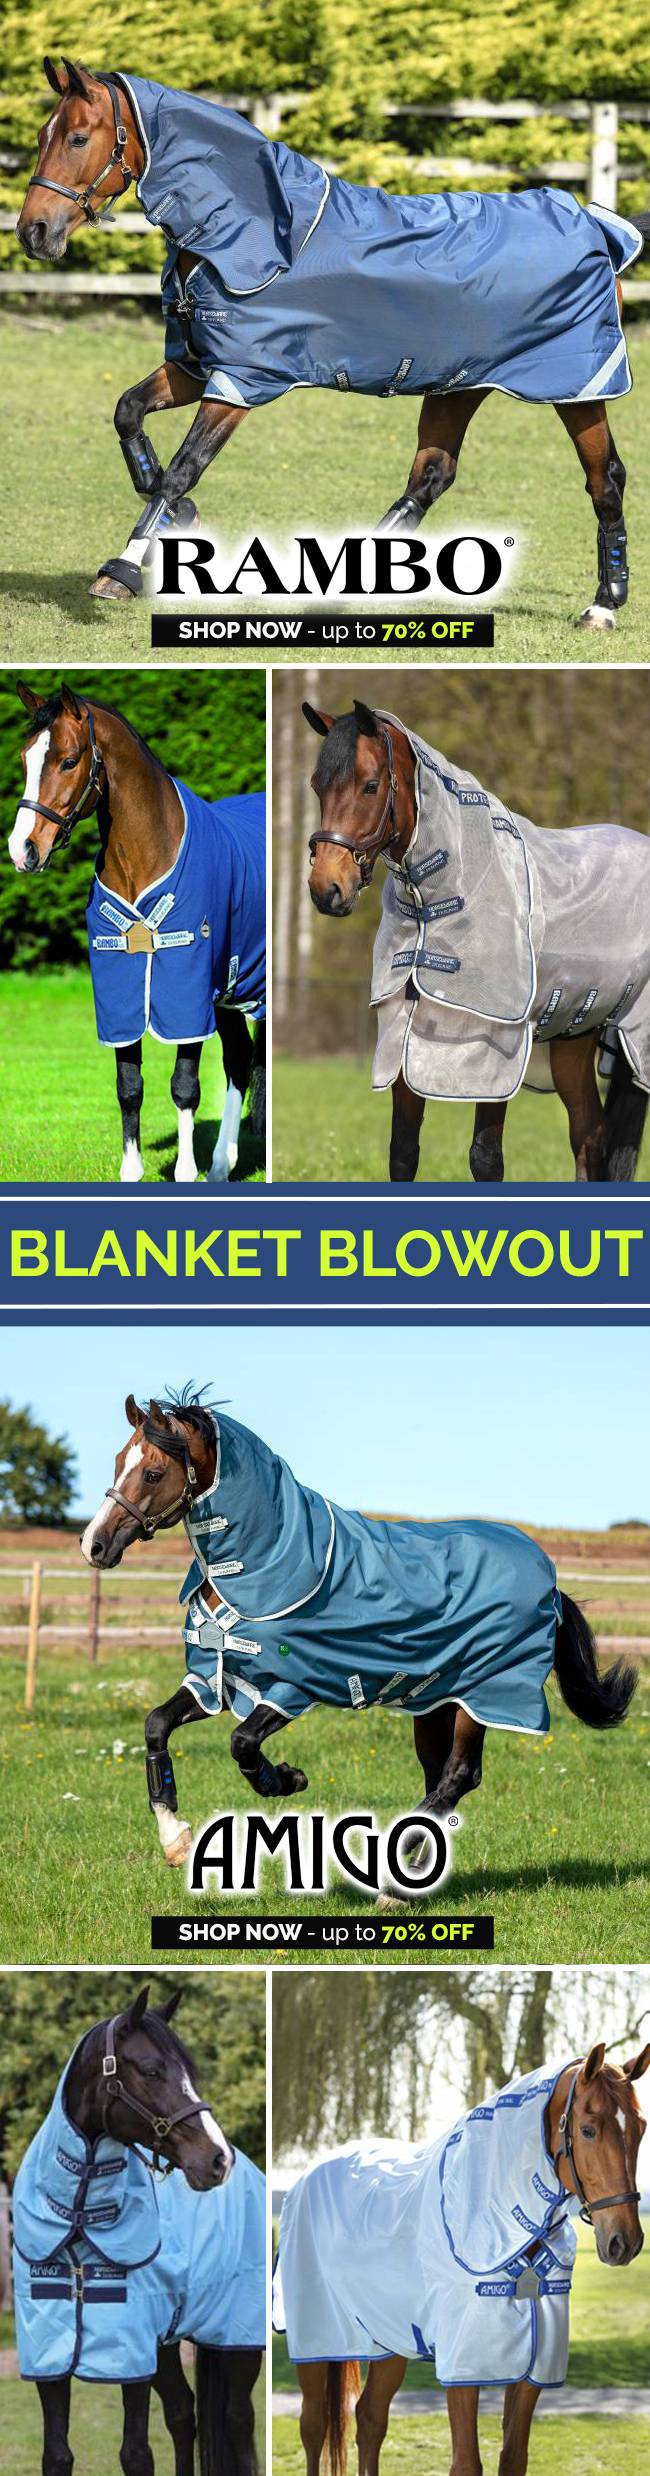 Blanket Blowout!  200+ Deals Up to 70% OFF